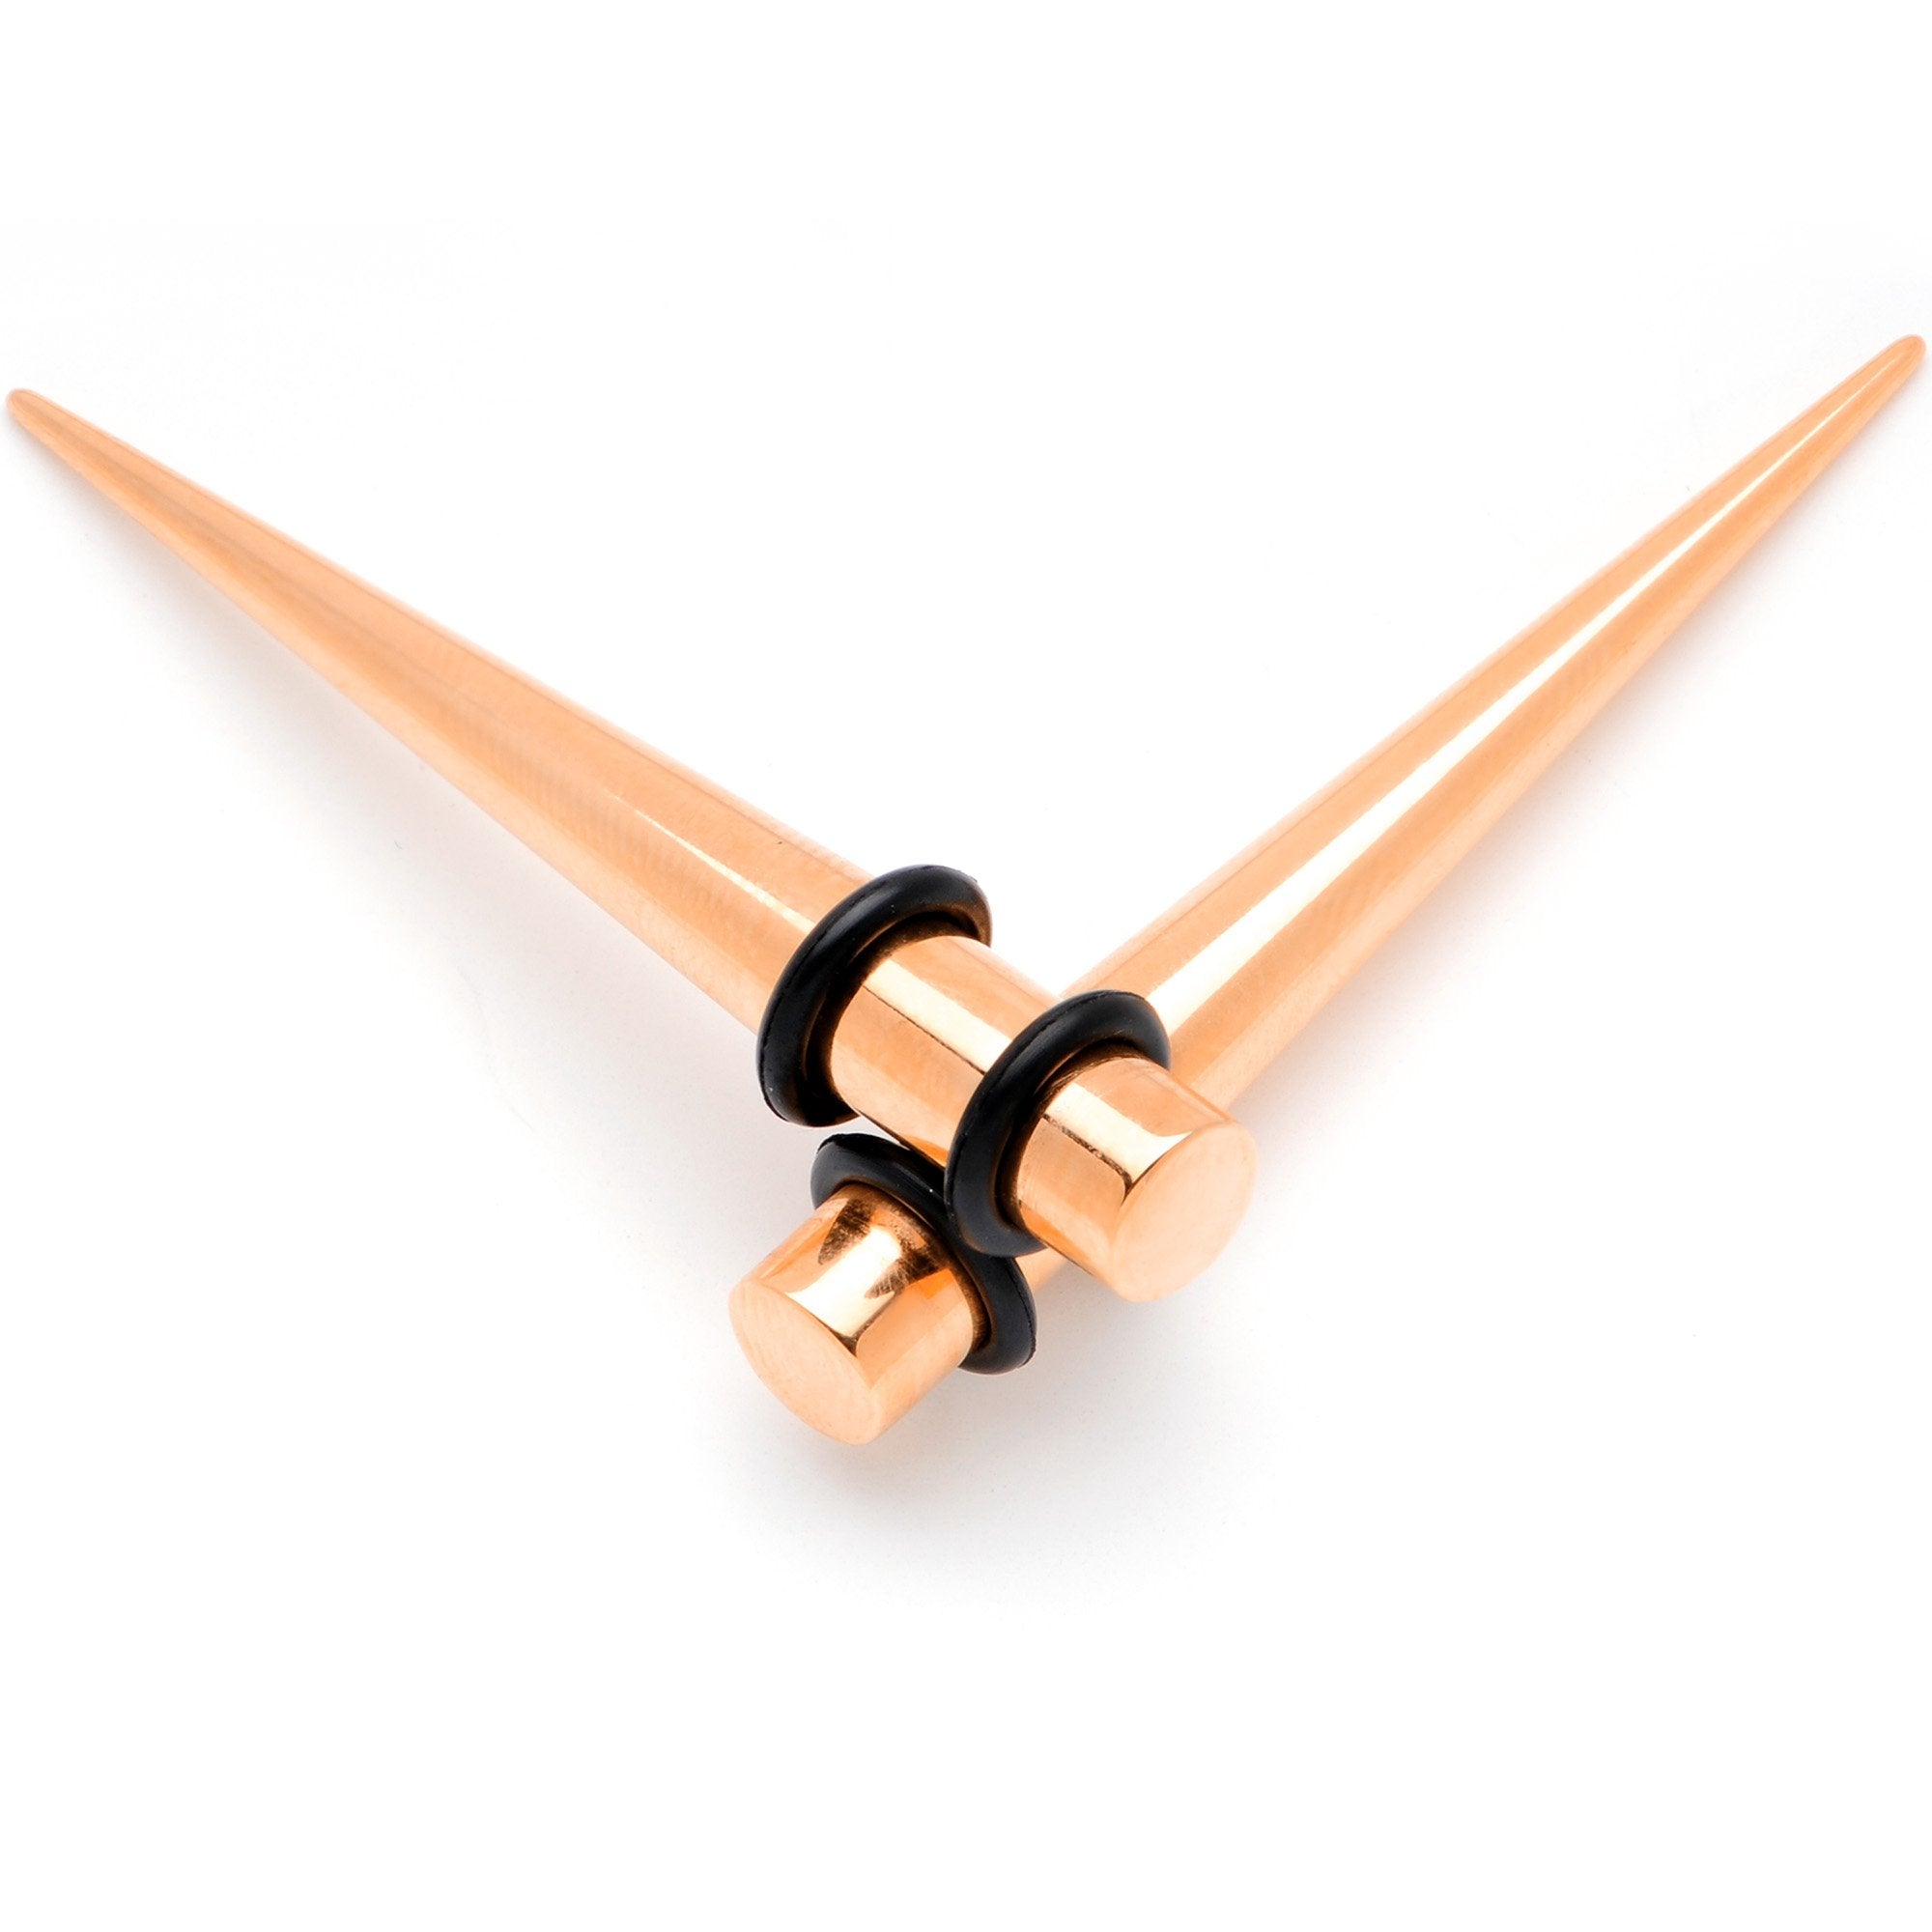 Rose Gold Tone Anodized Straight Taper Set Available in Sizes  14 Gauge to 00 Gauge